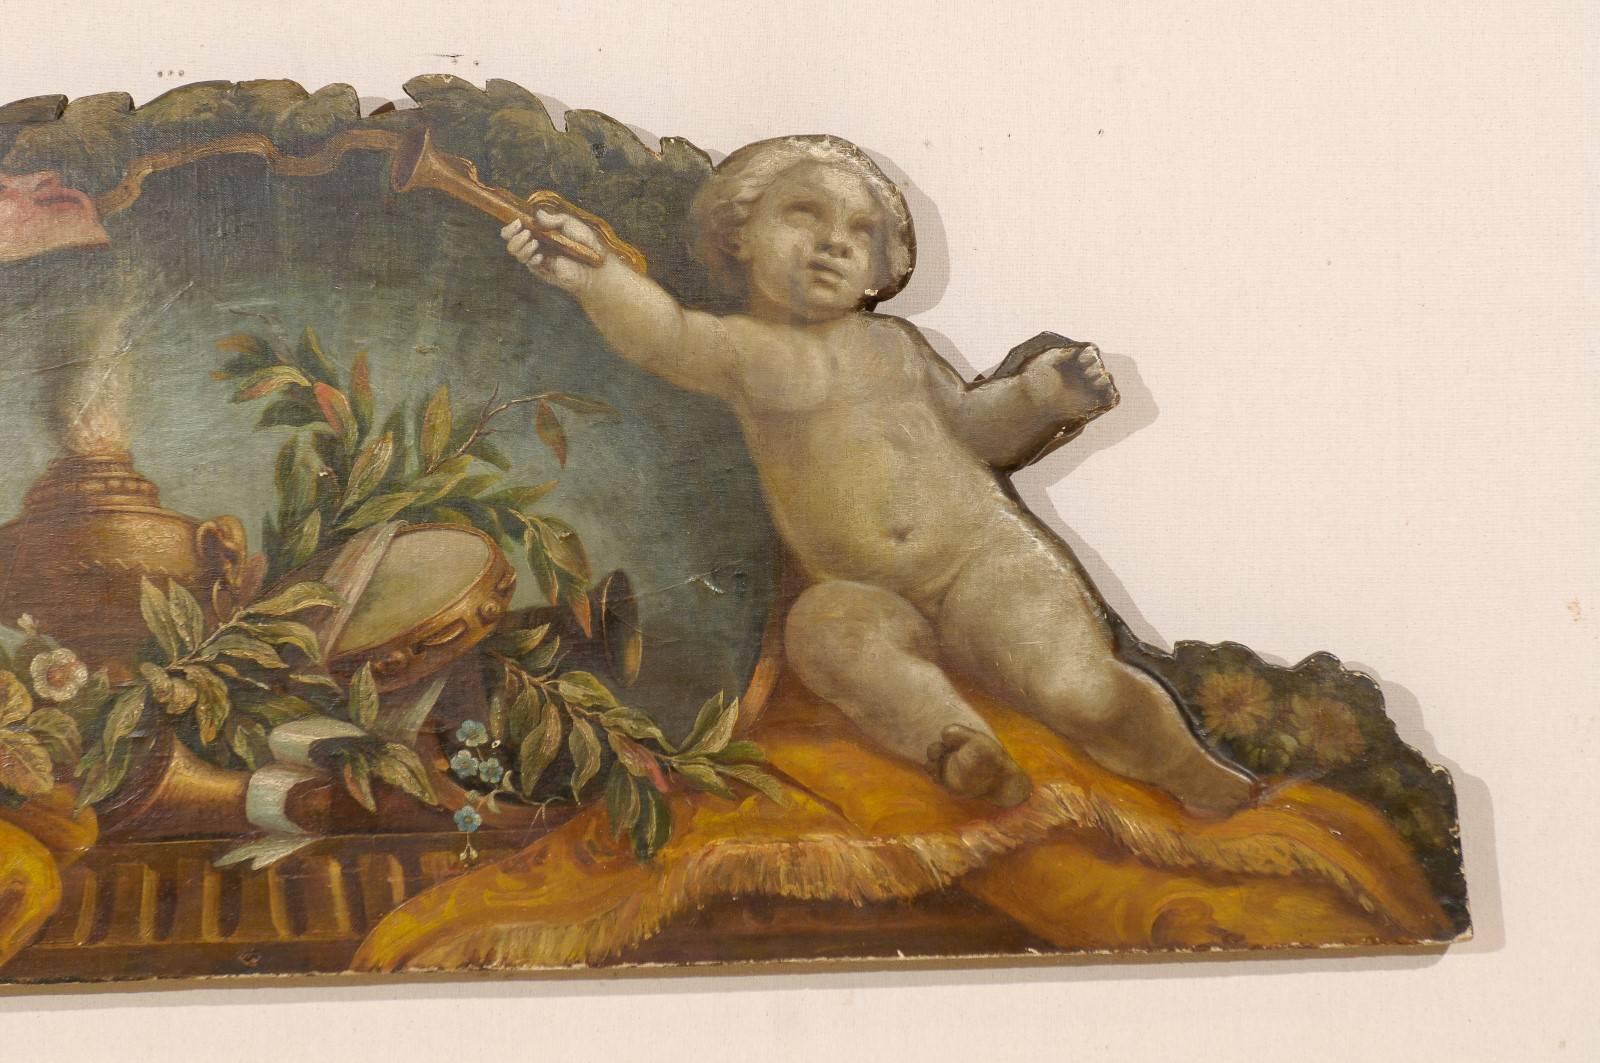 Canvas Exquisite 19th Century Italian Panel Featuring Allegories of Music and Theater